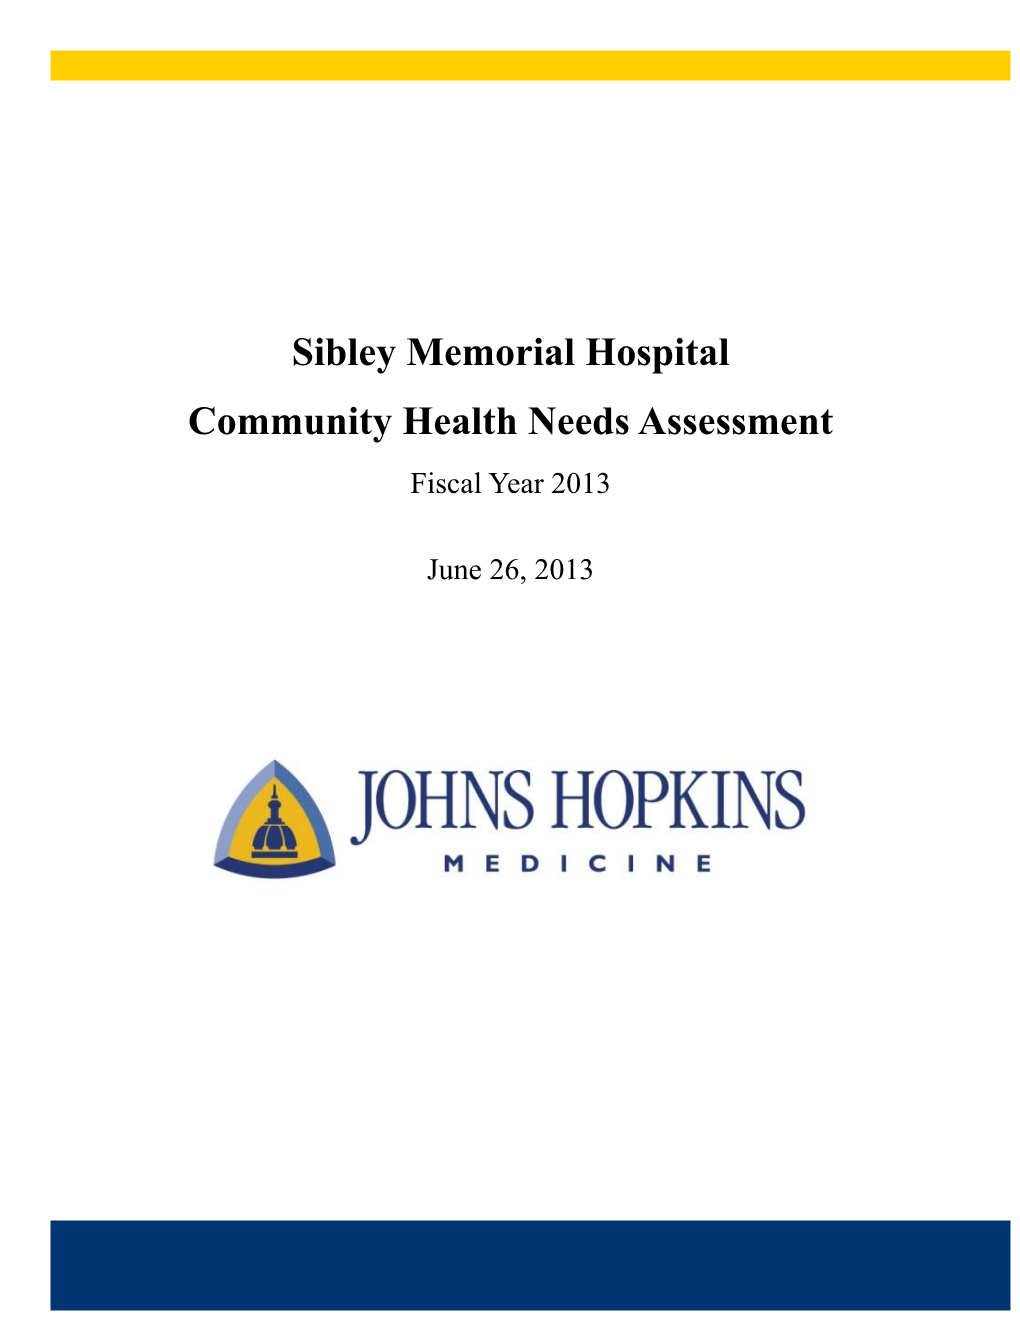 Sibley Memorial Hospital Community Health Needs Assessment Fiscal Year 2013